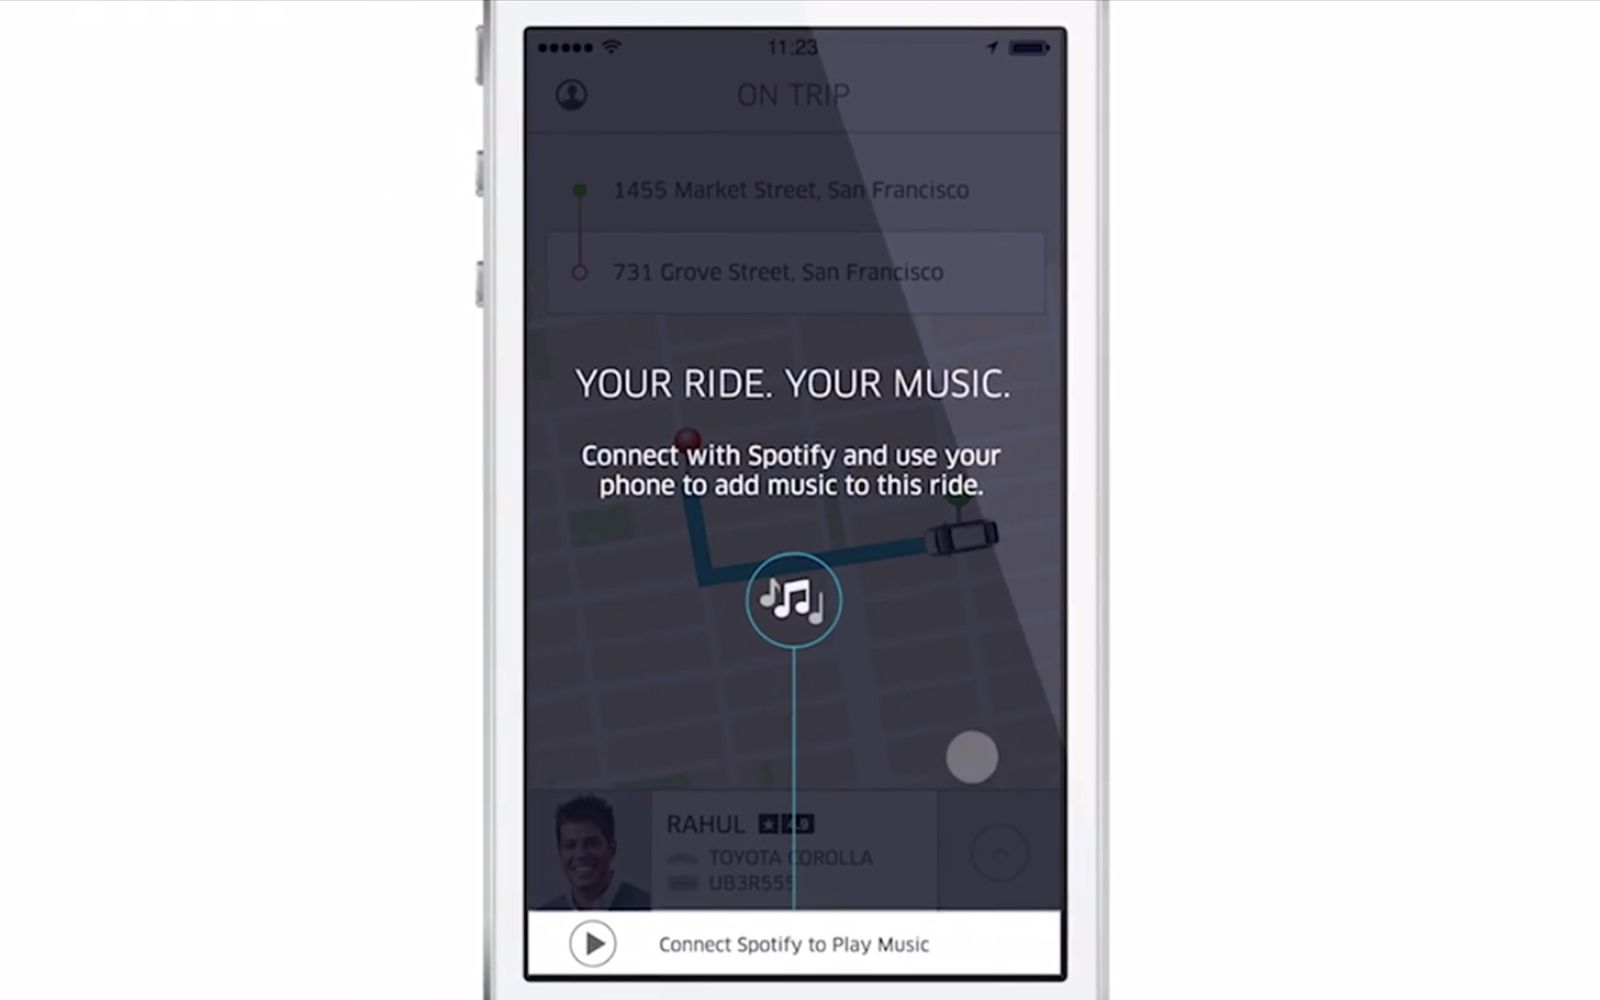 uber partners with spotify to let you choose your cab ride music image 1